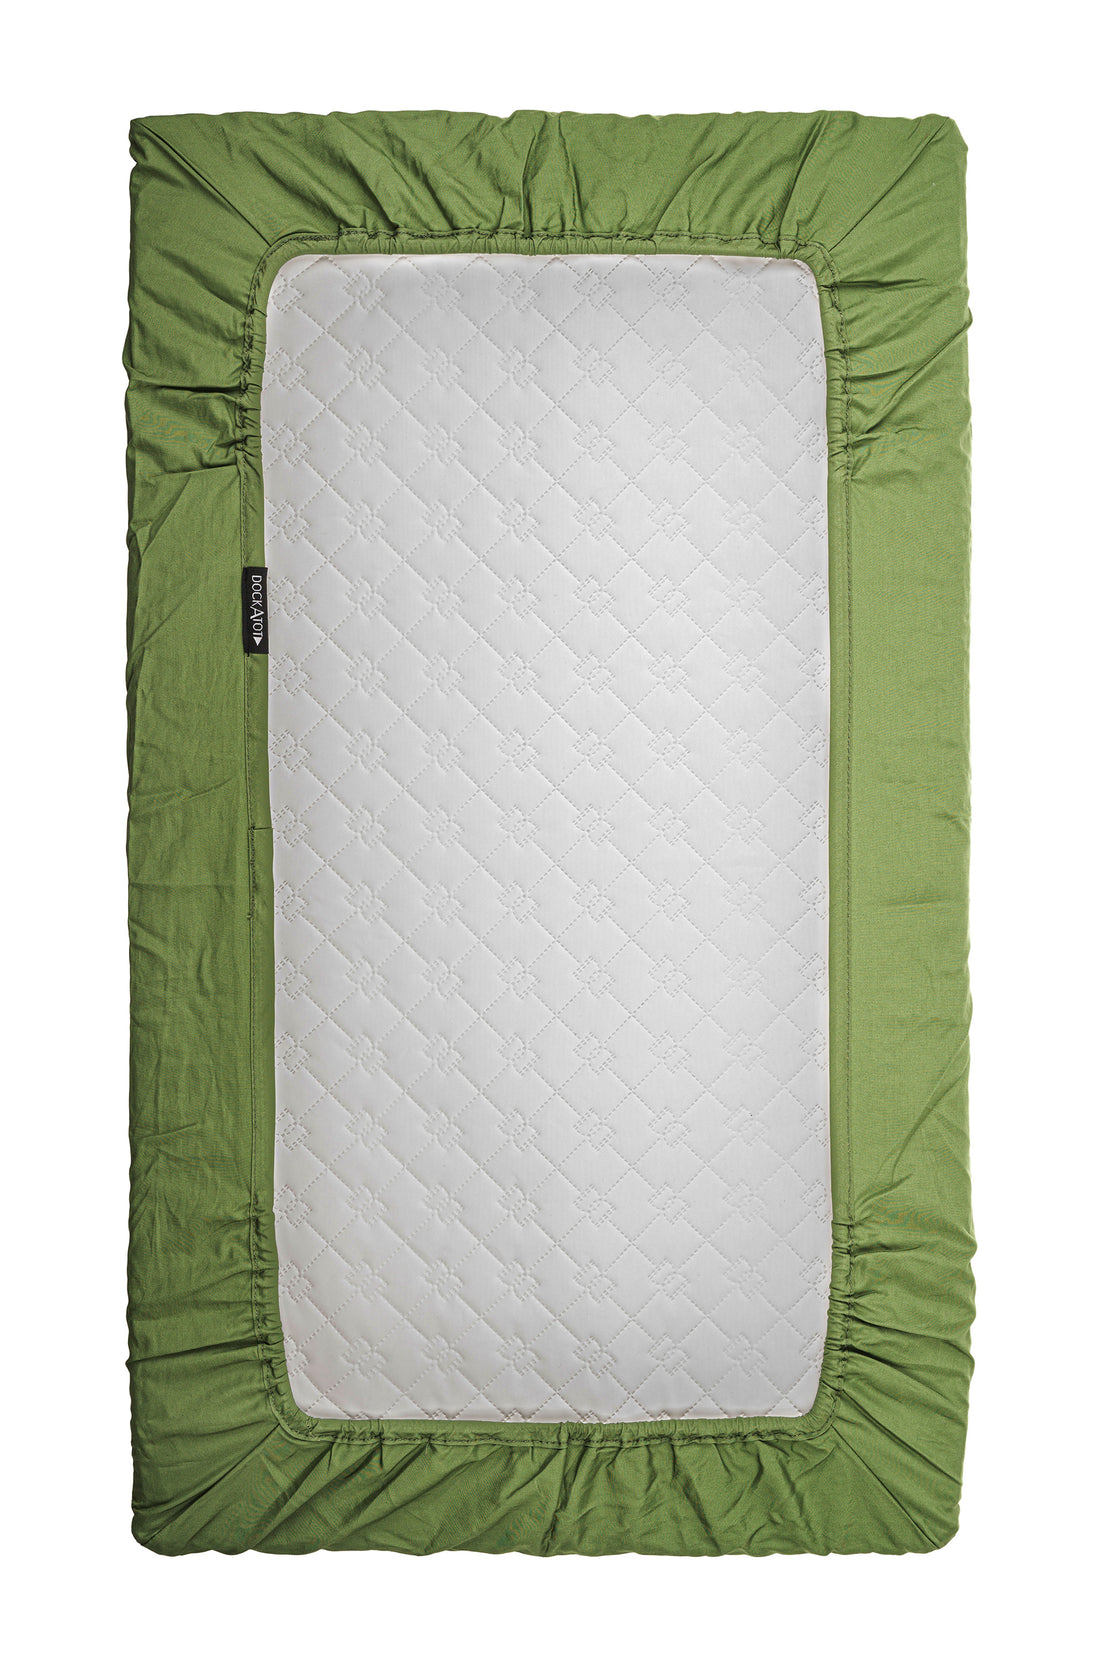 A green, fabric-bordered DockATot Sorona foam core mattress isolated on a white background. The mattress features a central white quilted section, zipper on one side, and a visible brand tag.